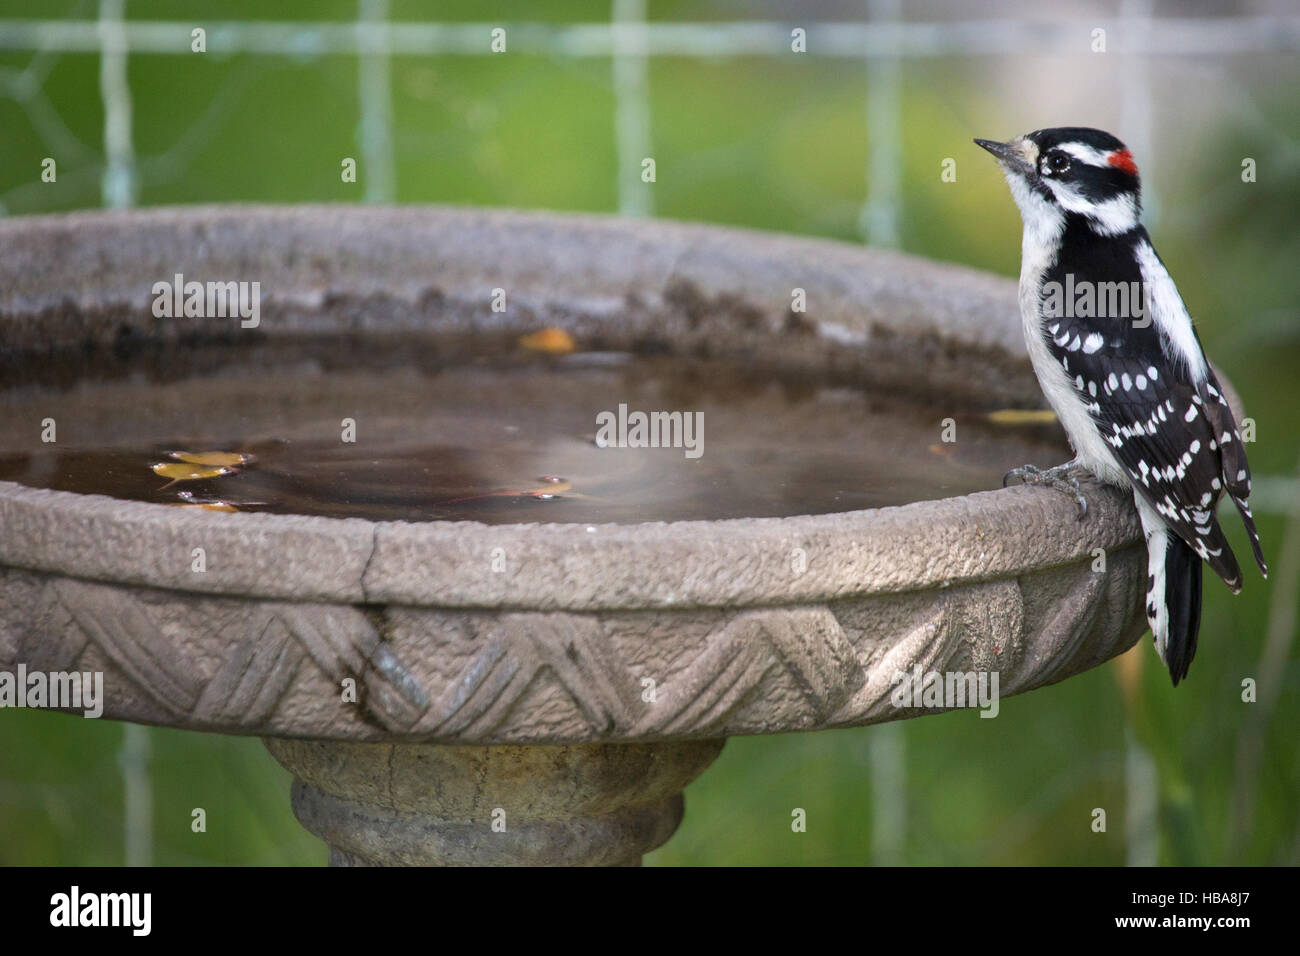 Male Downy Woodpecker perched on bird bath in home garden in summer (Dryobates pubescens) Stock Photo